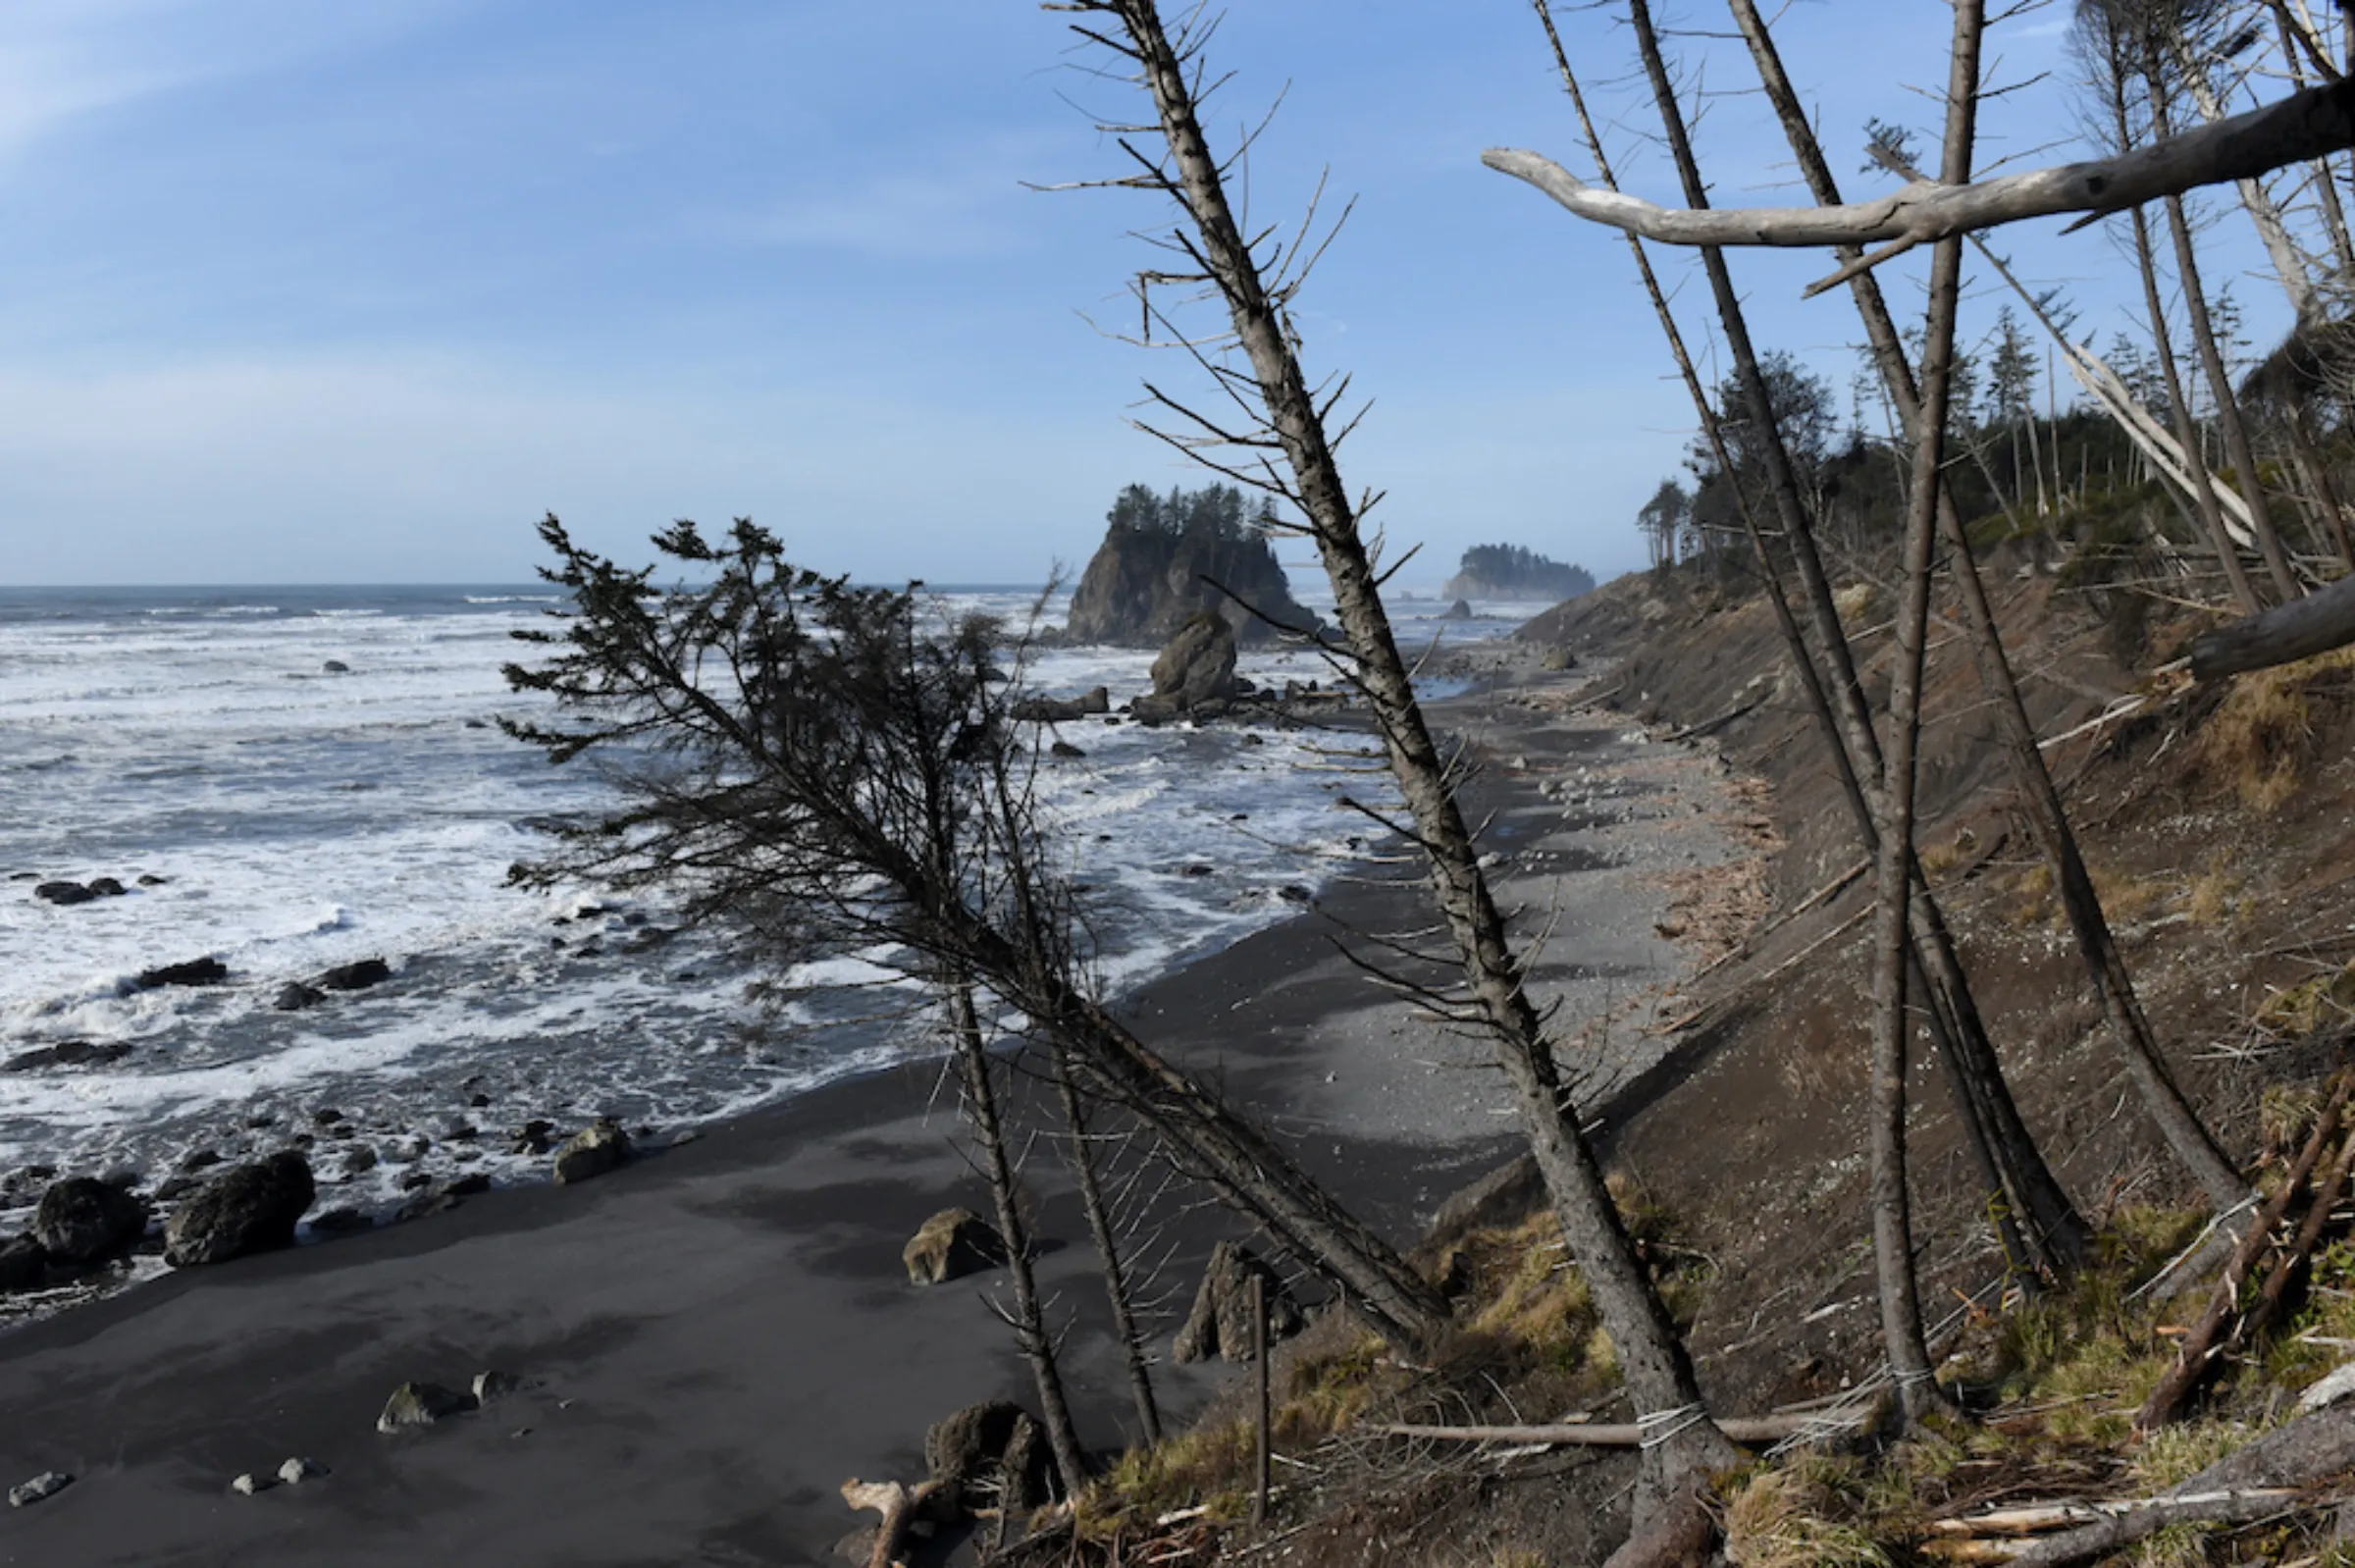 A coastline of the Pacific Ocean, damaged by erosion, is seen on the Quinault Indian Reservation in Taholah, Washington, U.S. March 4, 2020. REUTERS/Stephanie Keith